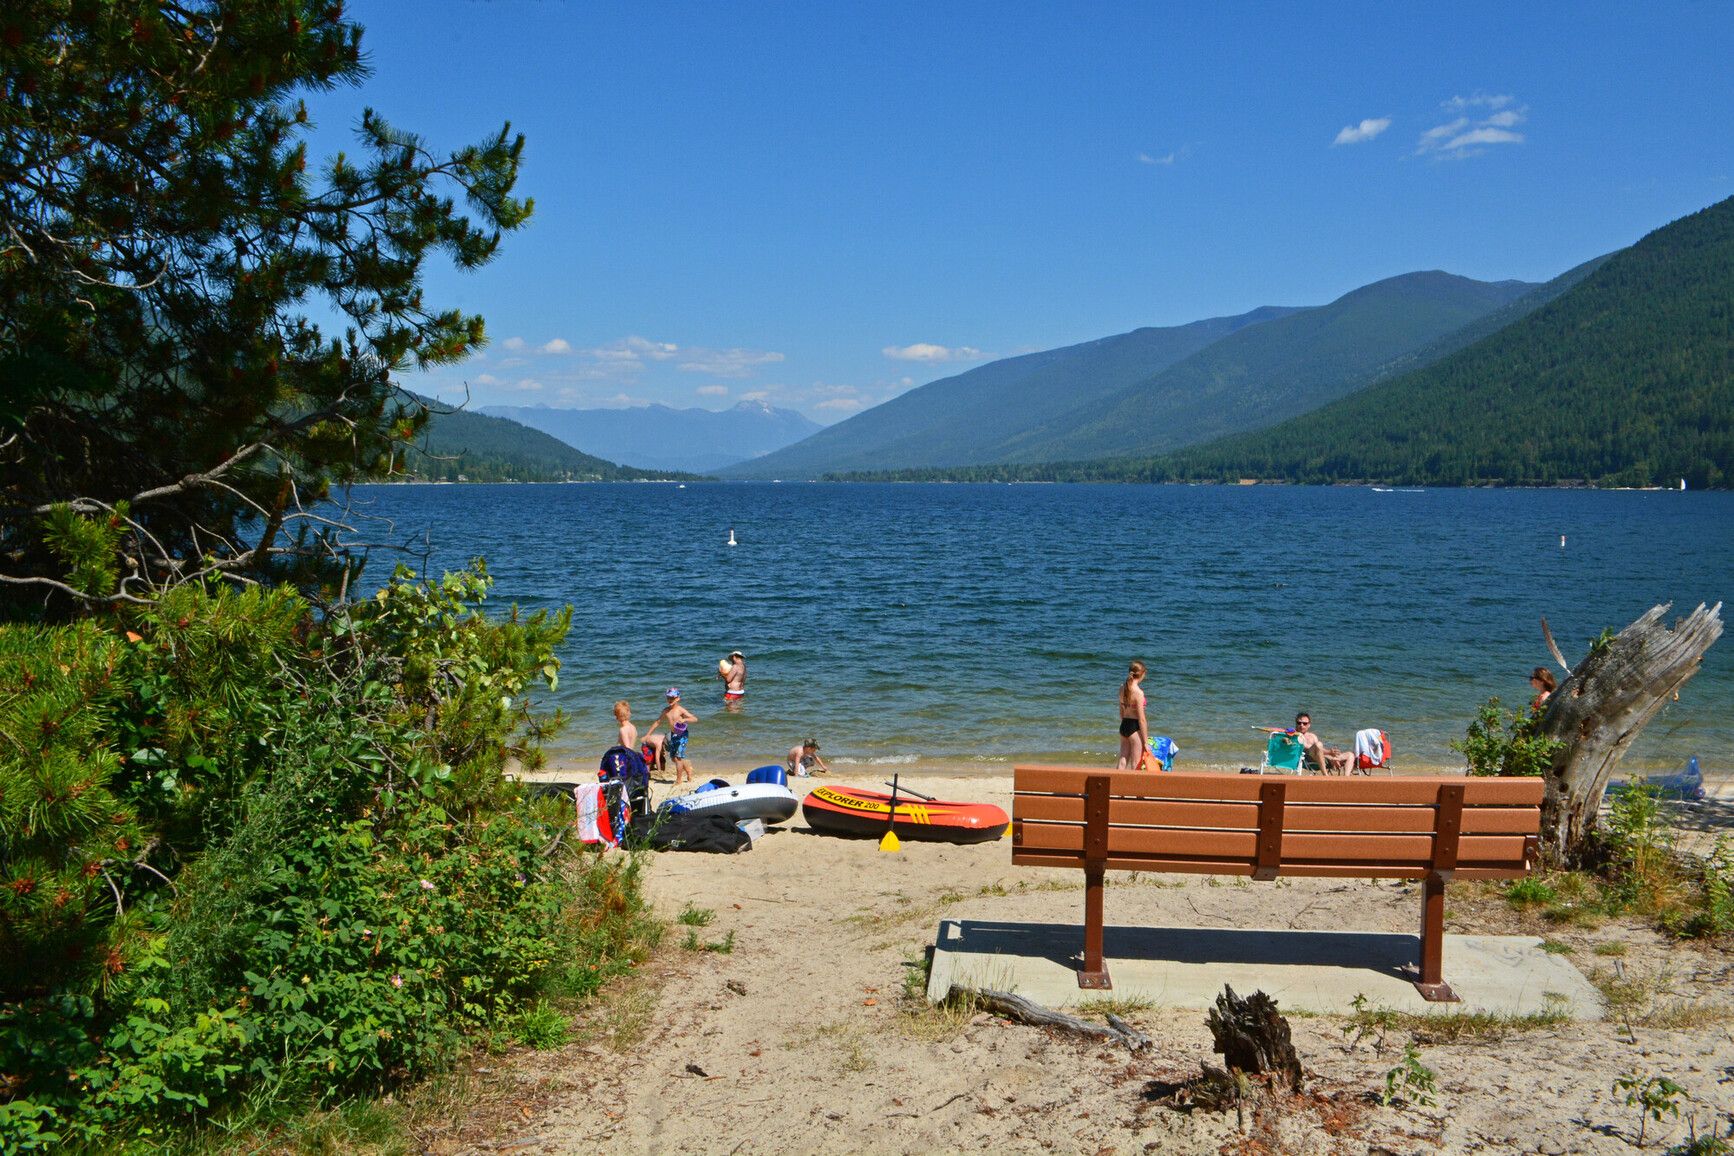 Family day at the beach in Kokanee Creek Park offers a beautiful view of the lake and surrounding mountains.